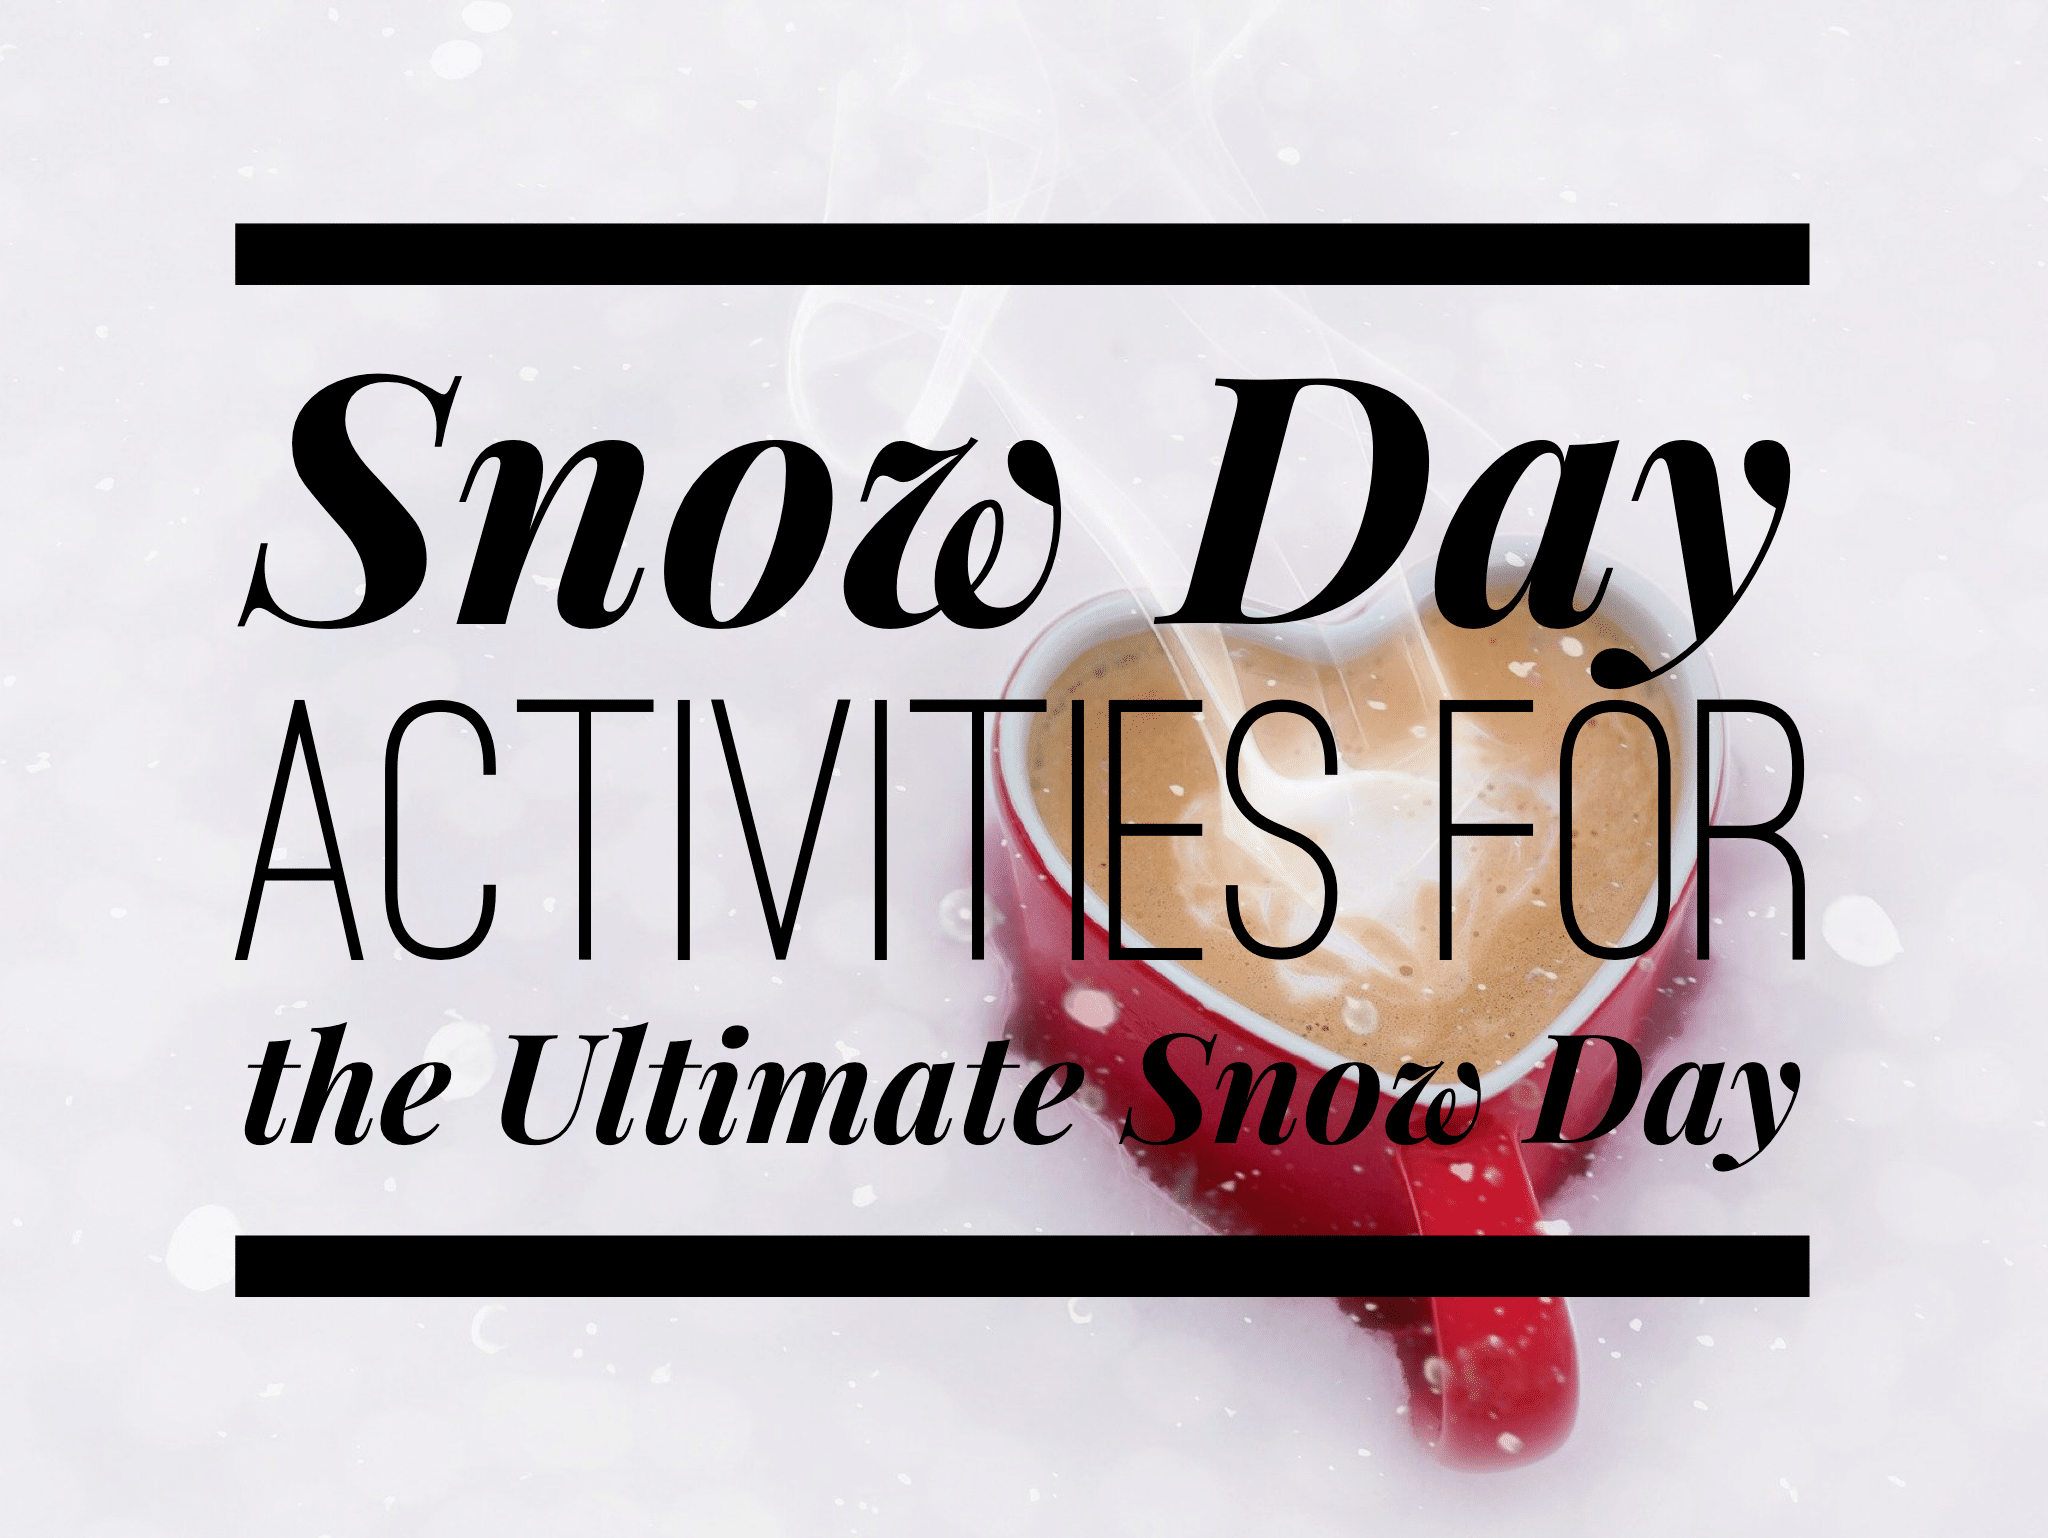 Snow Day Activities for the Ultimate Snow Day